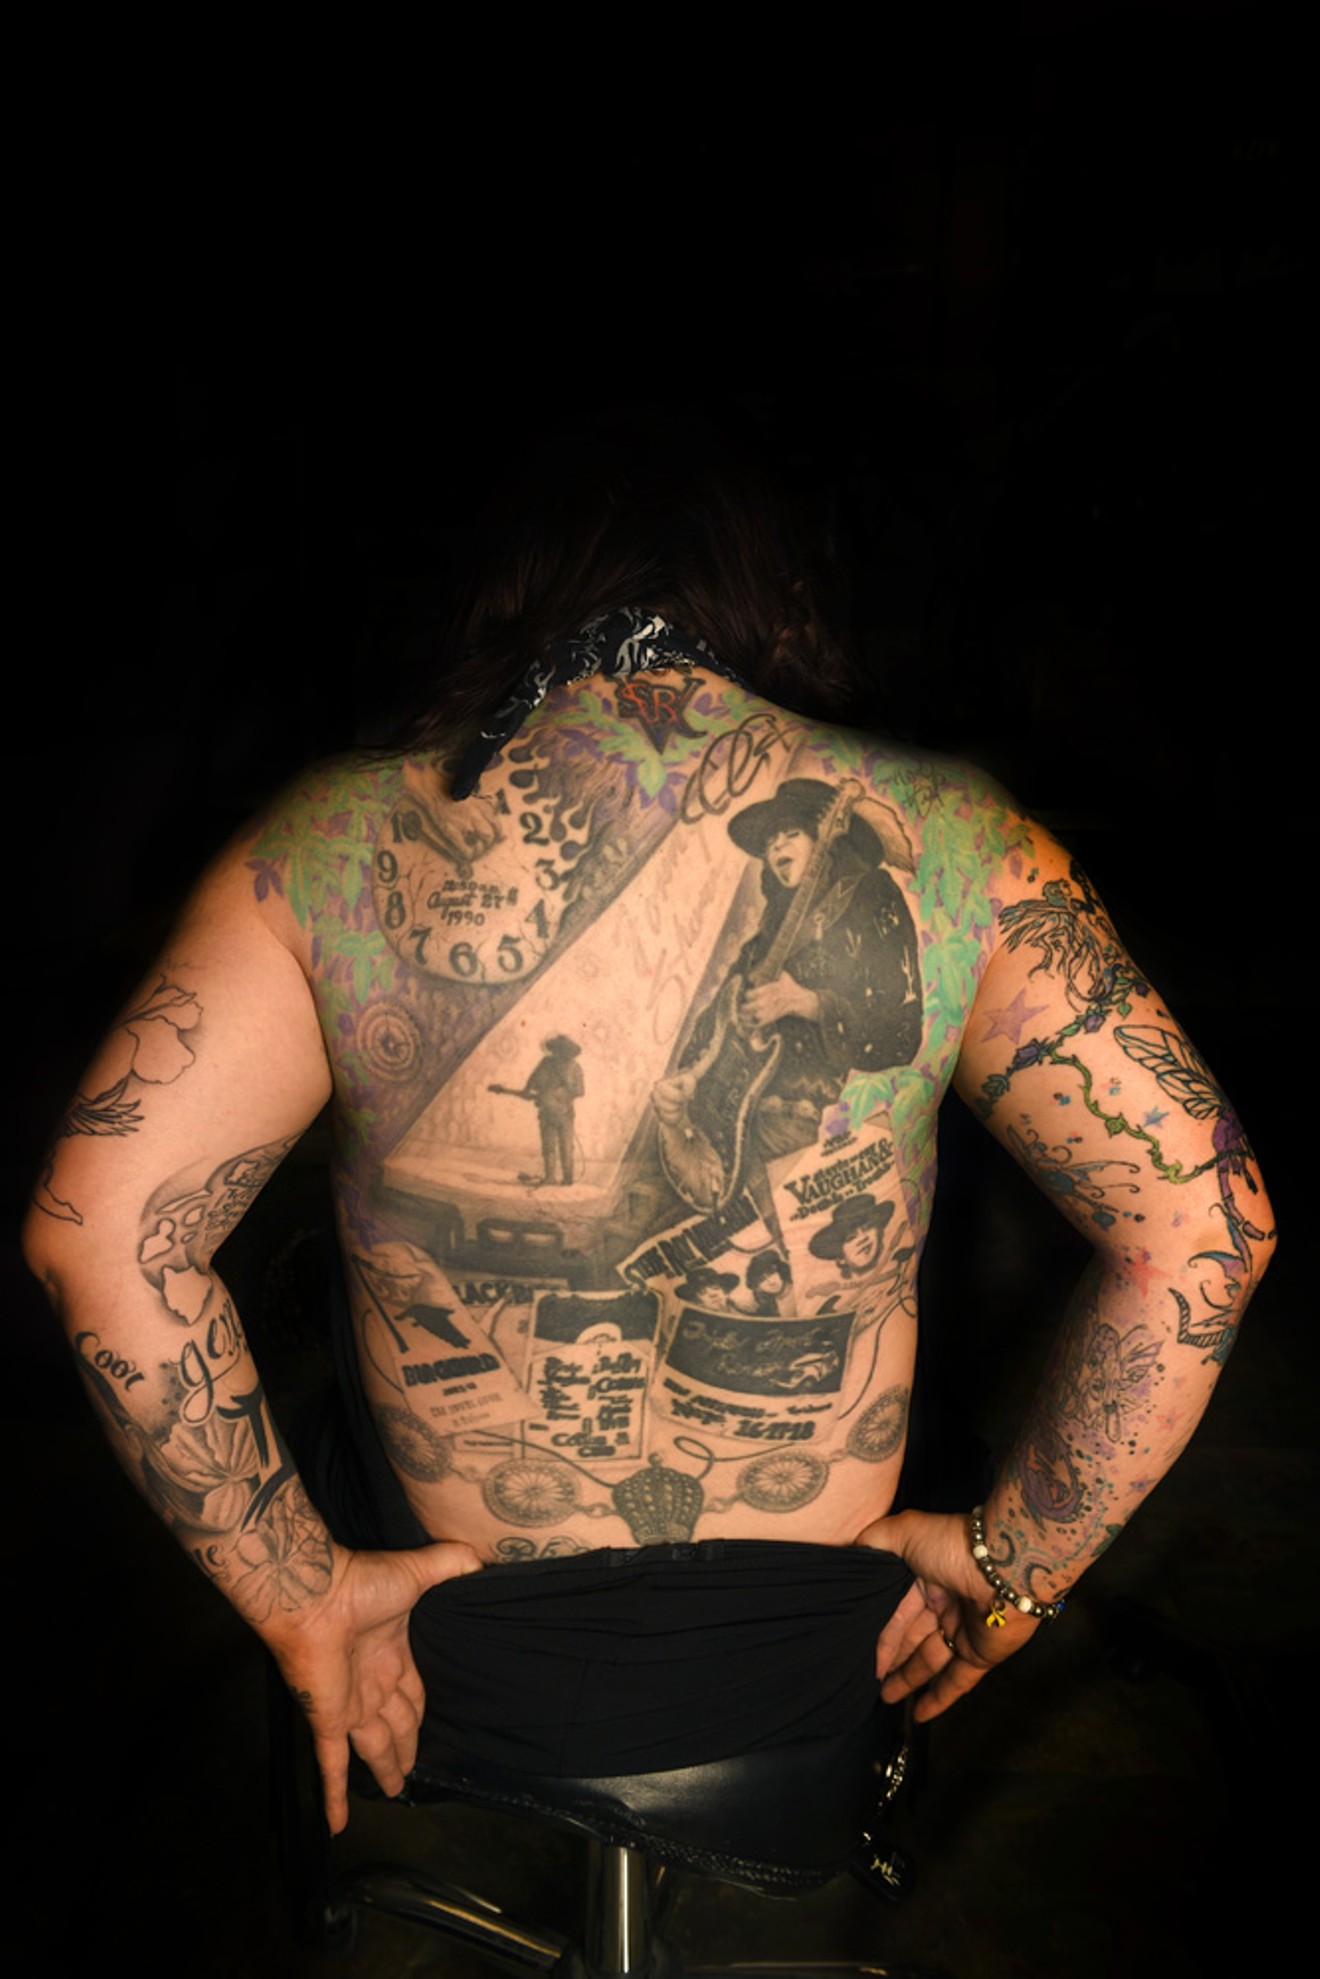 Theresa Barksdale has tattooed her back as a tribute to Stevie Ray Vaughan.